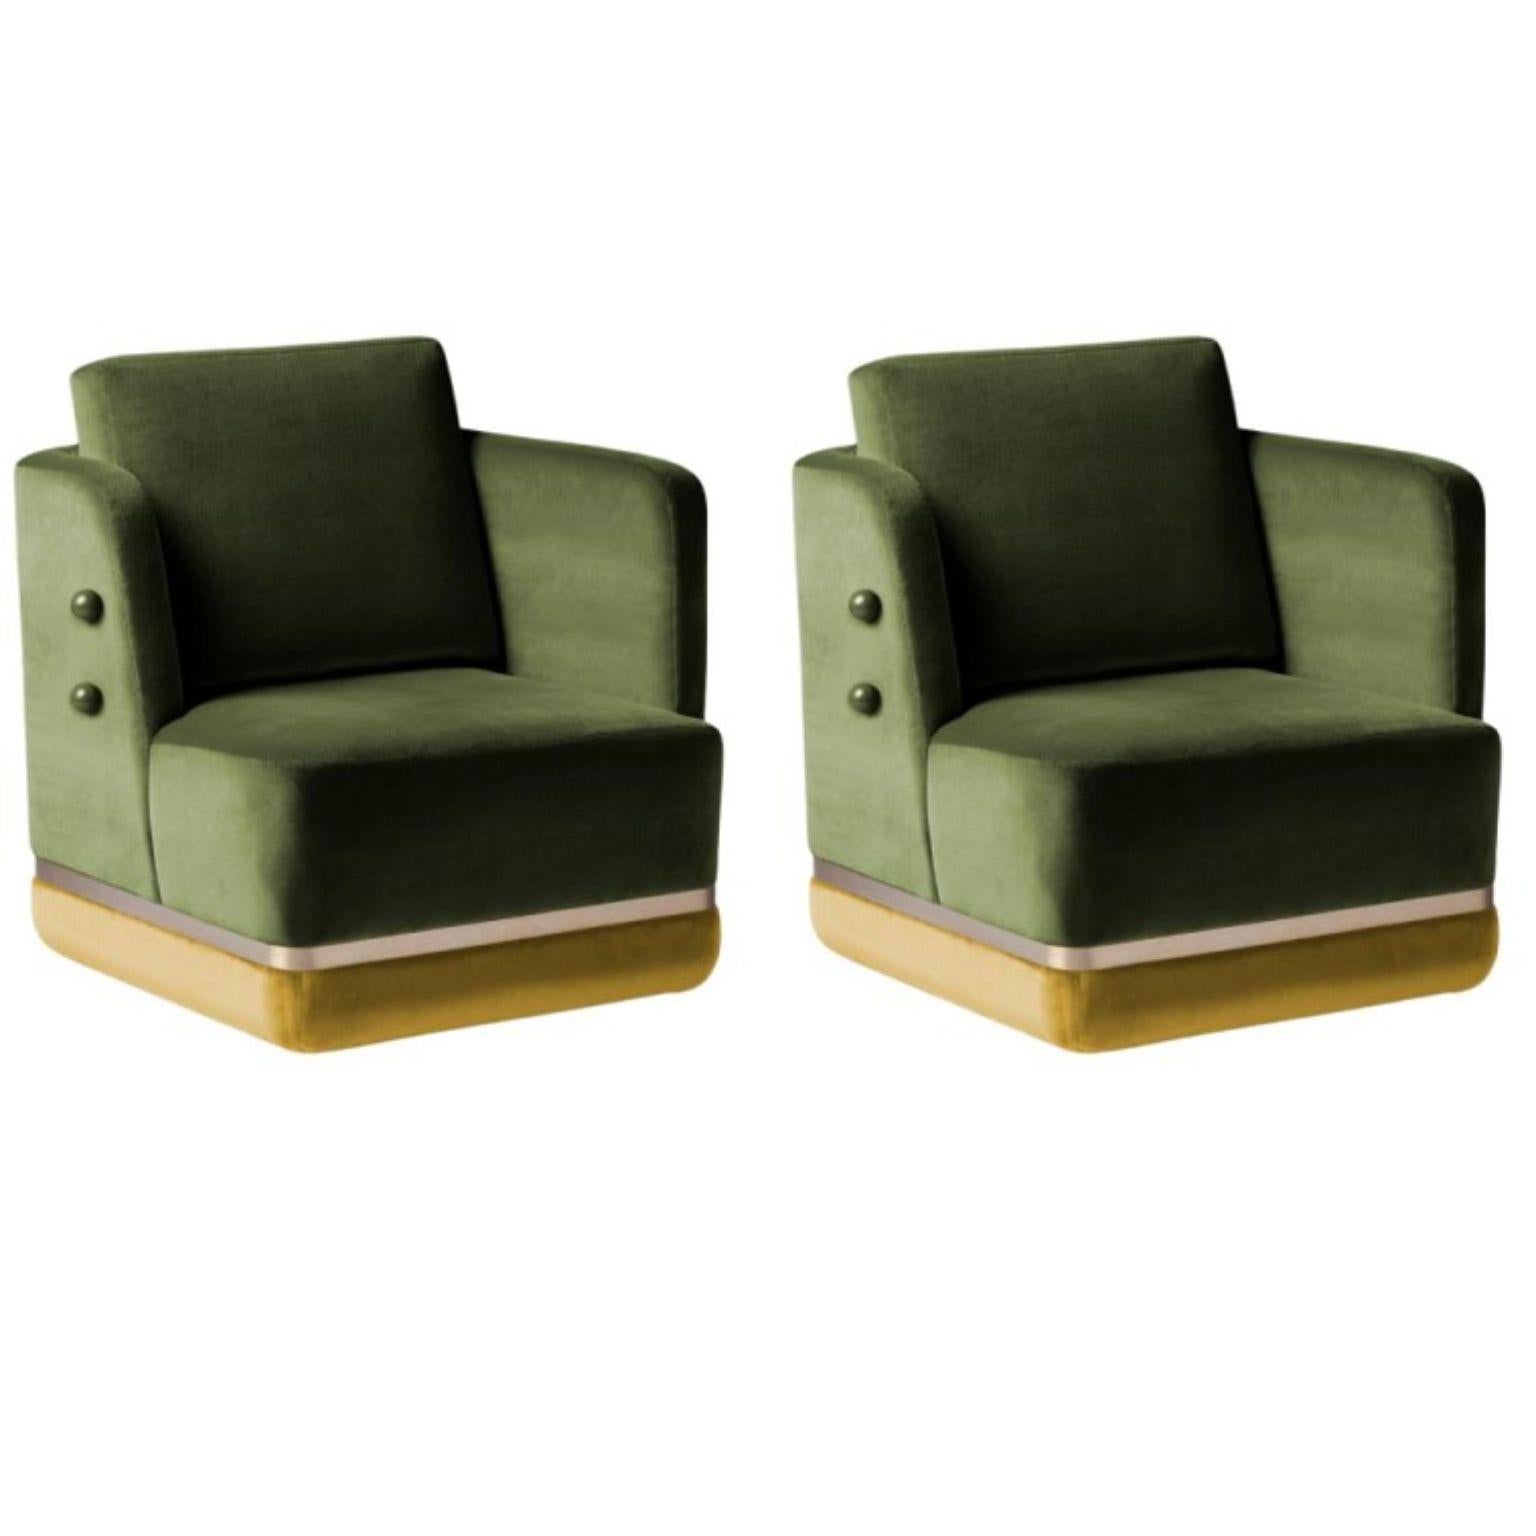 Set of 2 Panorama Armchairs by Dooq
Materials: Lacquered MDF, Fabric, Leather, Stainless Steel
Dimensions: W 69 x D 73 x H 86 cm


Dooq is a design company dedicated to celebrate the luxury of living. Creating designs that stimulate the senses,